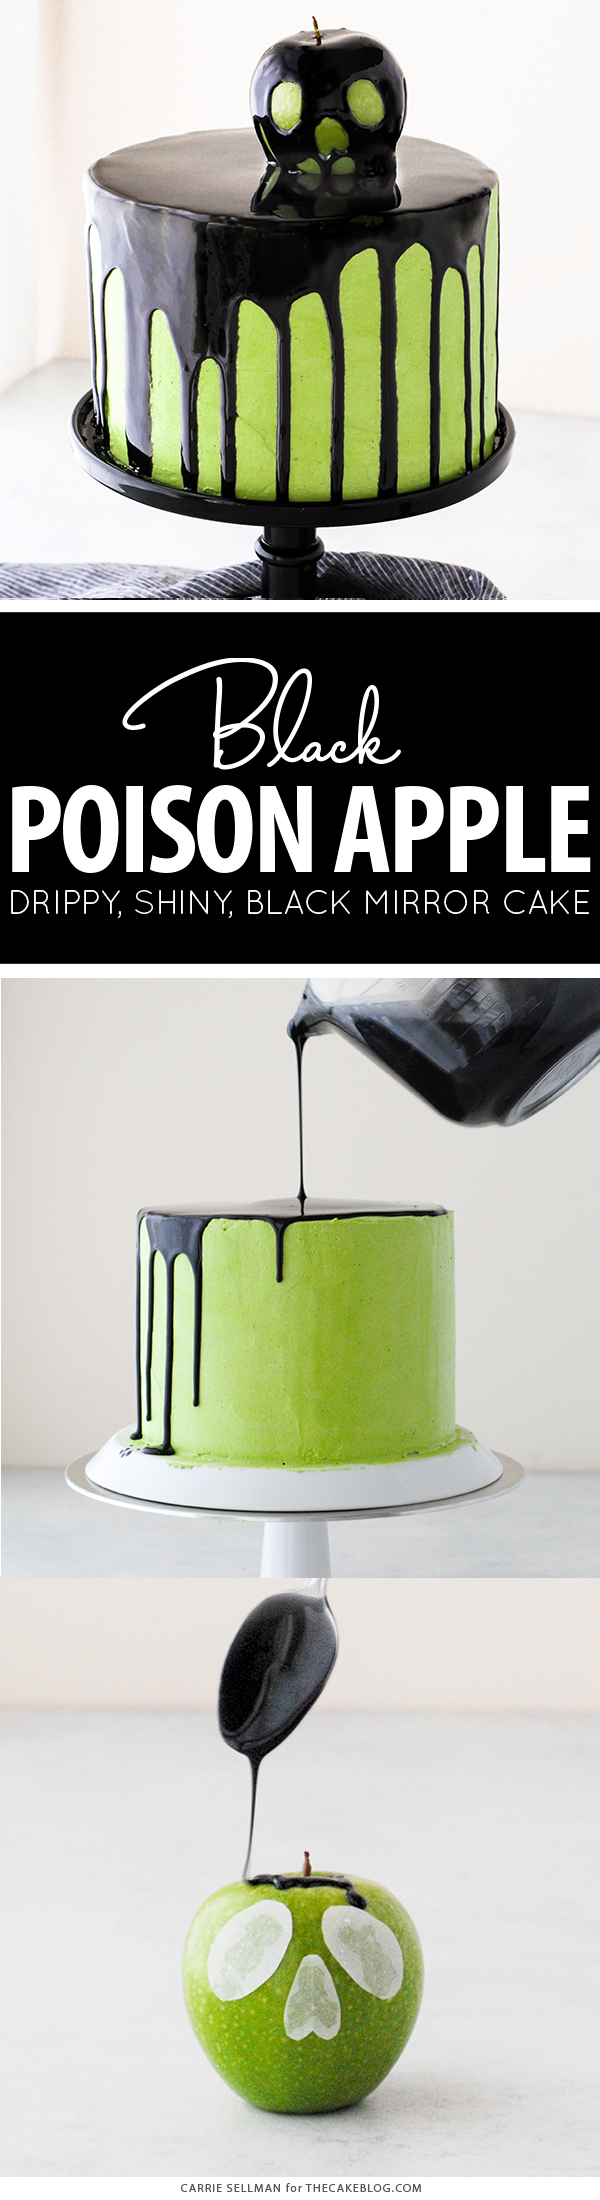 Poison Apple Cake - a black mirror glaze cake with an edible "poison apple" for Halloween | by Carrie Sellman for TheCakeBlog.com